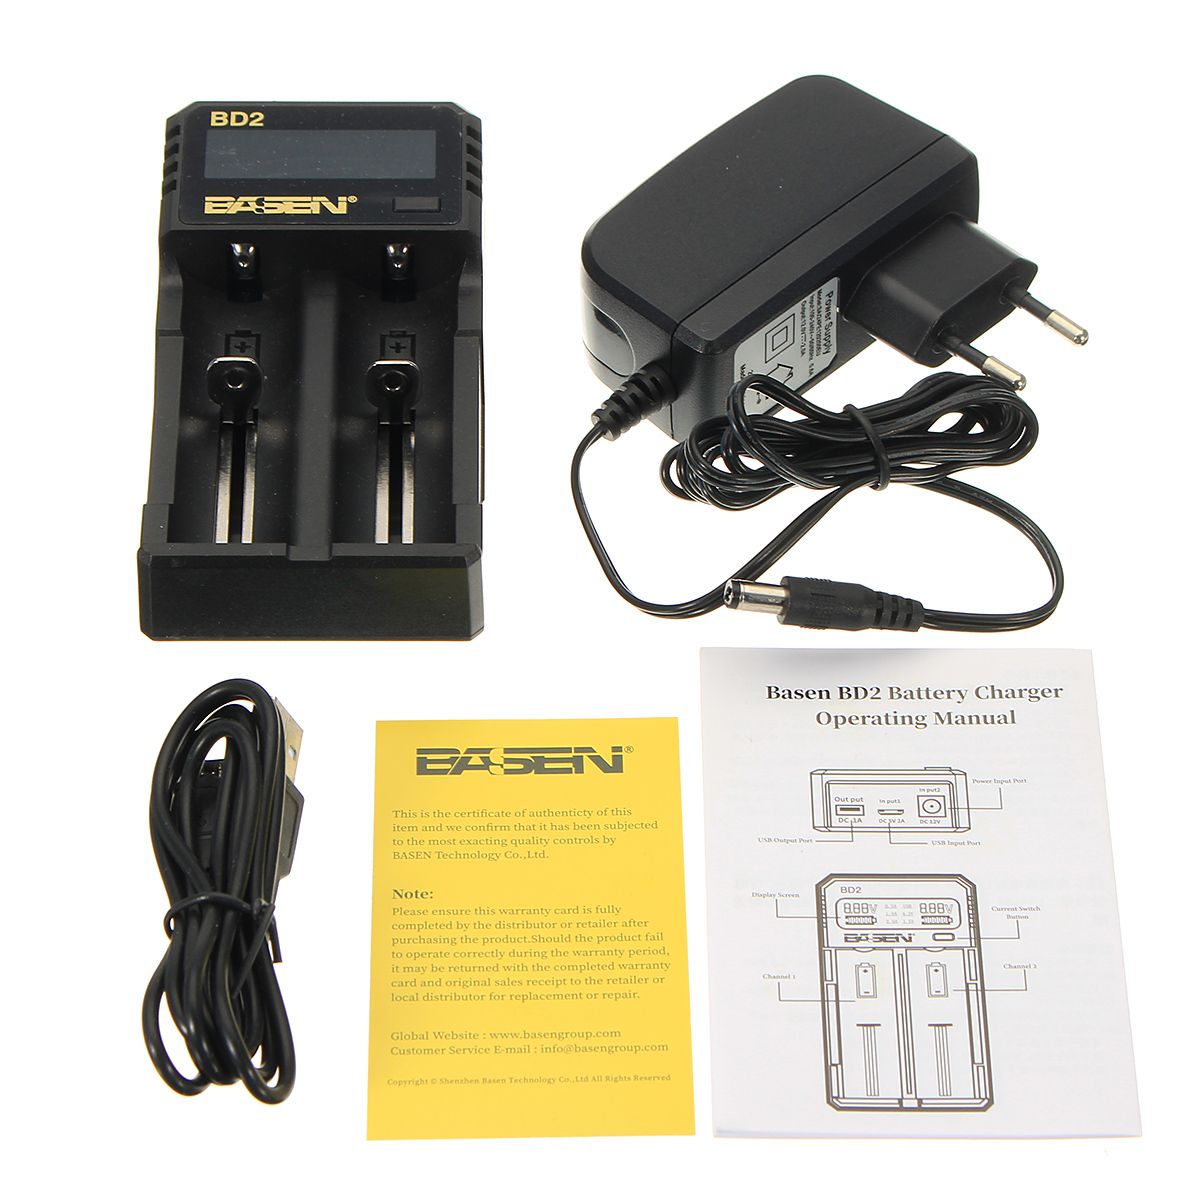 Basen-BD-2-18650-Power-Battery-Charger-Li-on-LCD-Display-2-Slot-USB-Rechargeable-1459454